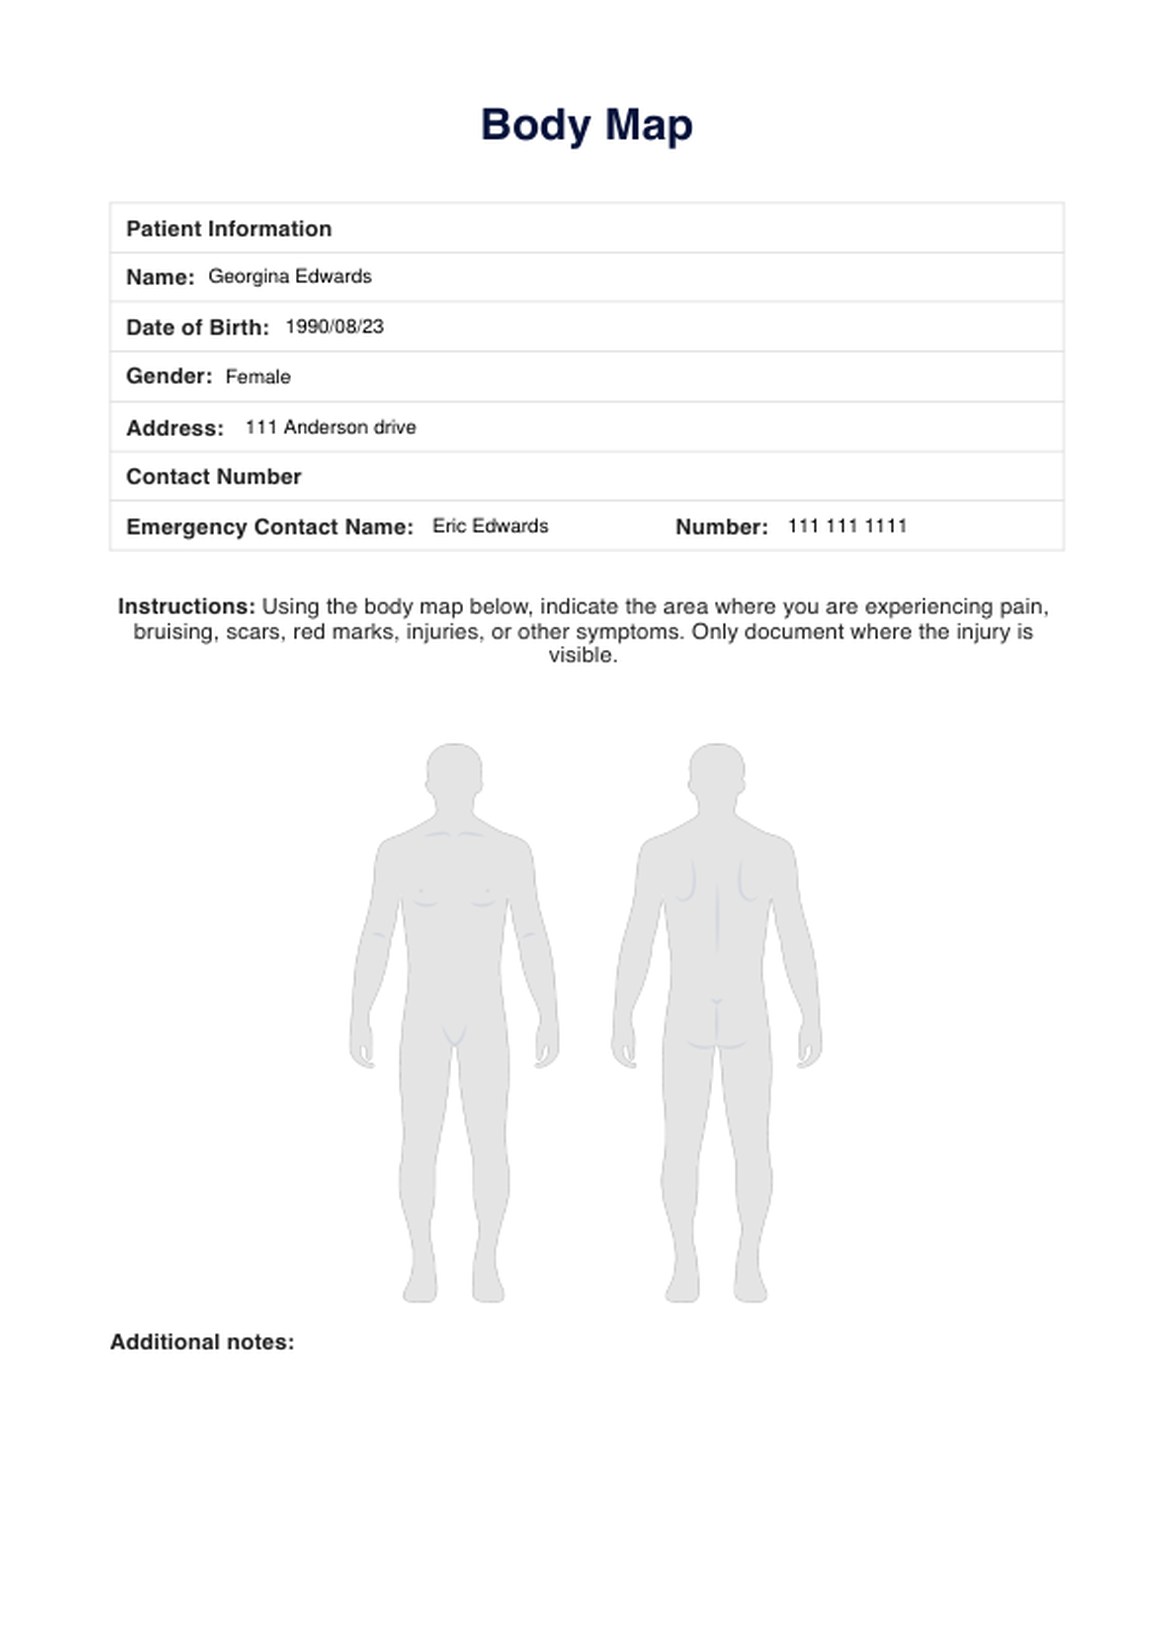 Body Map Template PDF Example